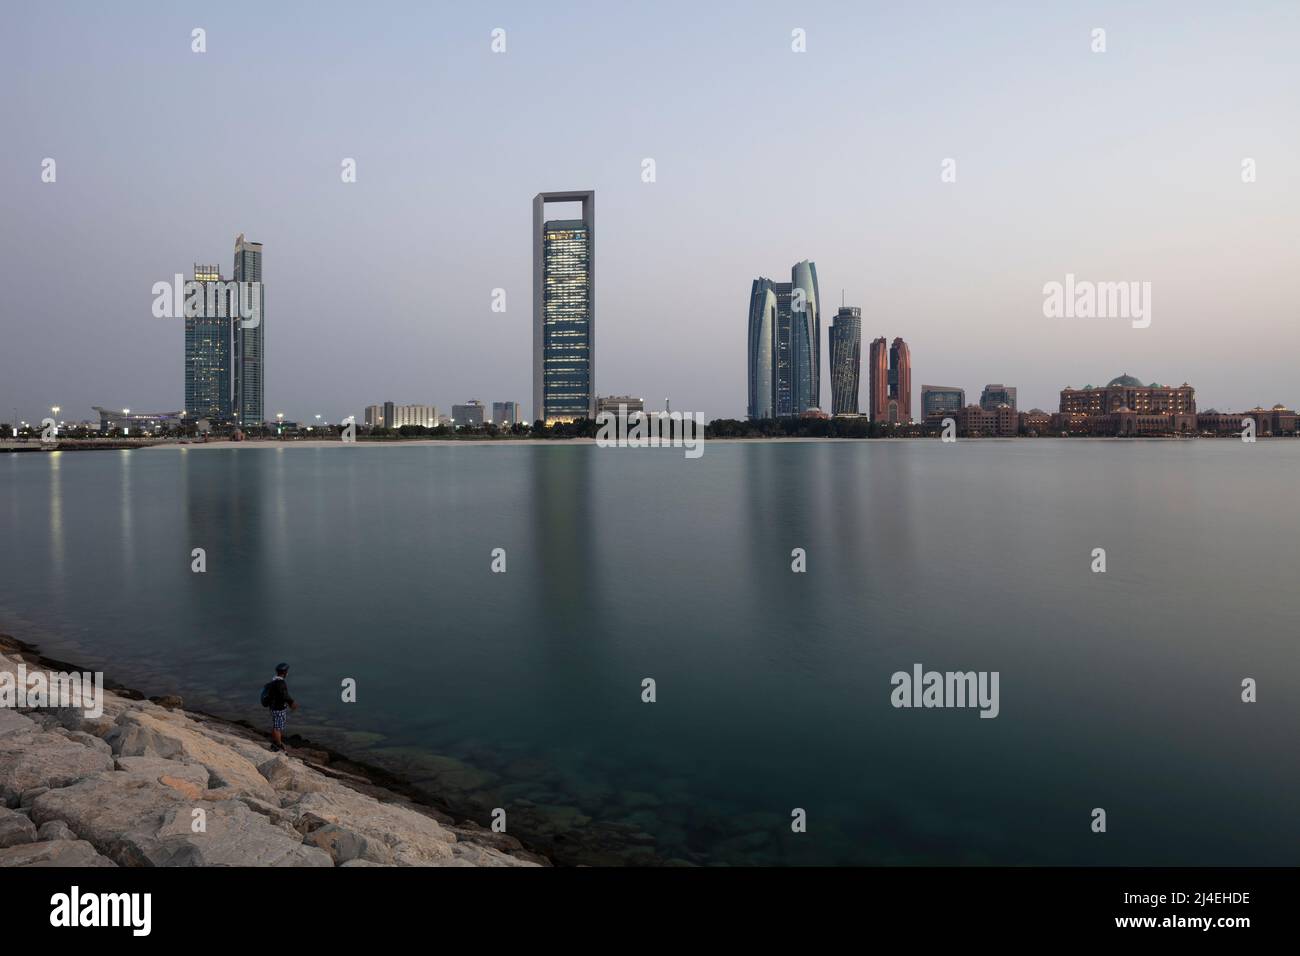 ABU DHABI, UNITED ARAB EMIRATES - October 25, 2021: (L-R) A landscape of Nation Towers, ADNOC Headquarters, Etihad Towers, and Emirates Palace. Stock Photo